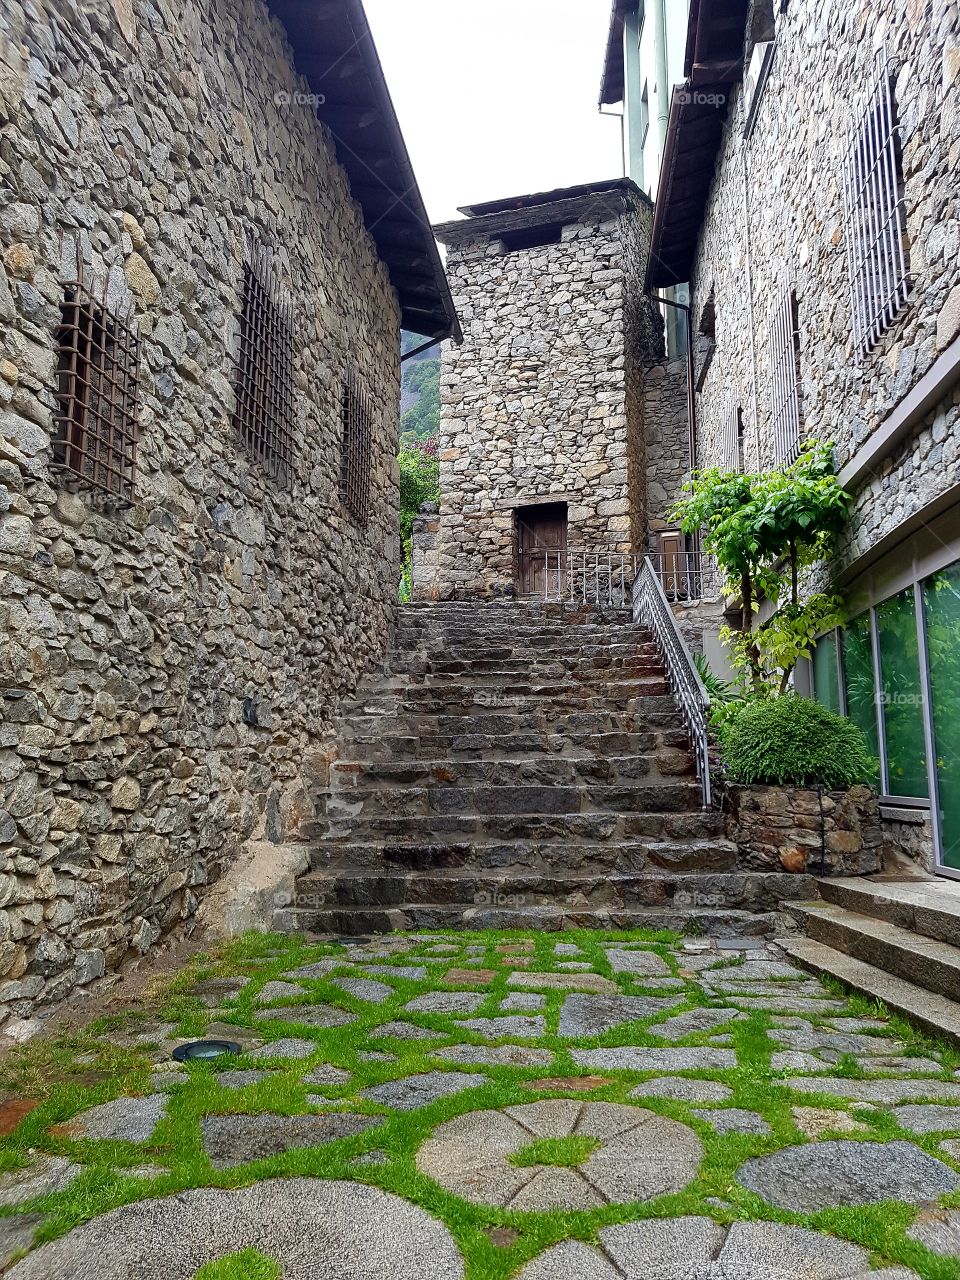 stone path with grass surrounded by stone houses